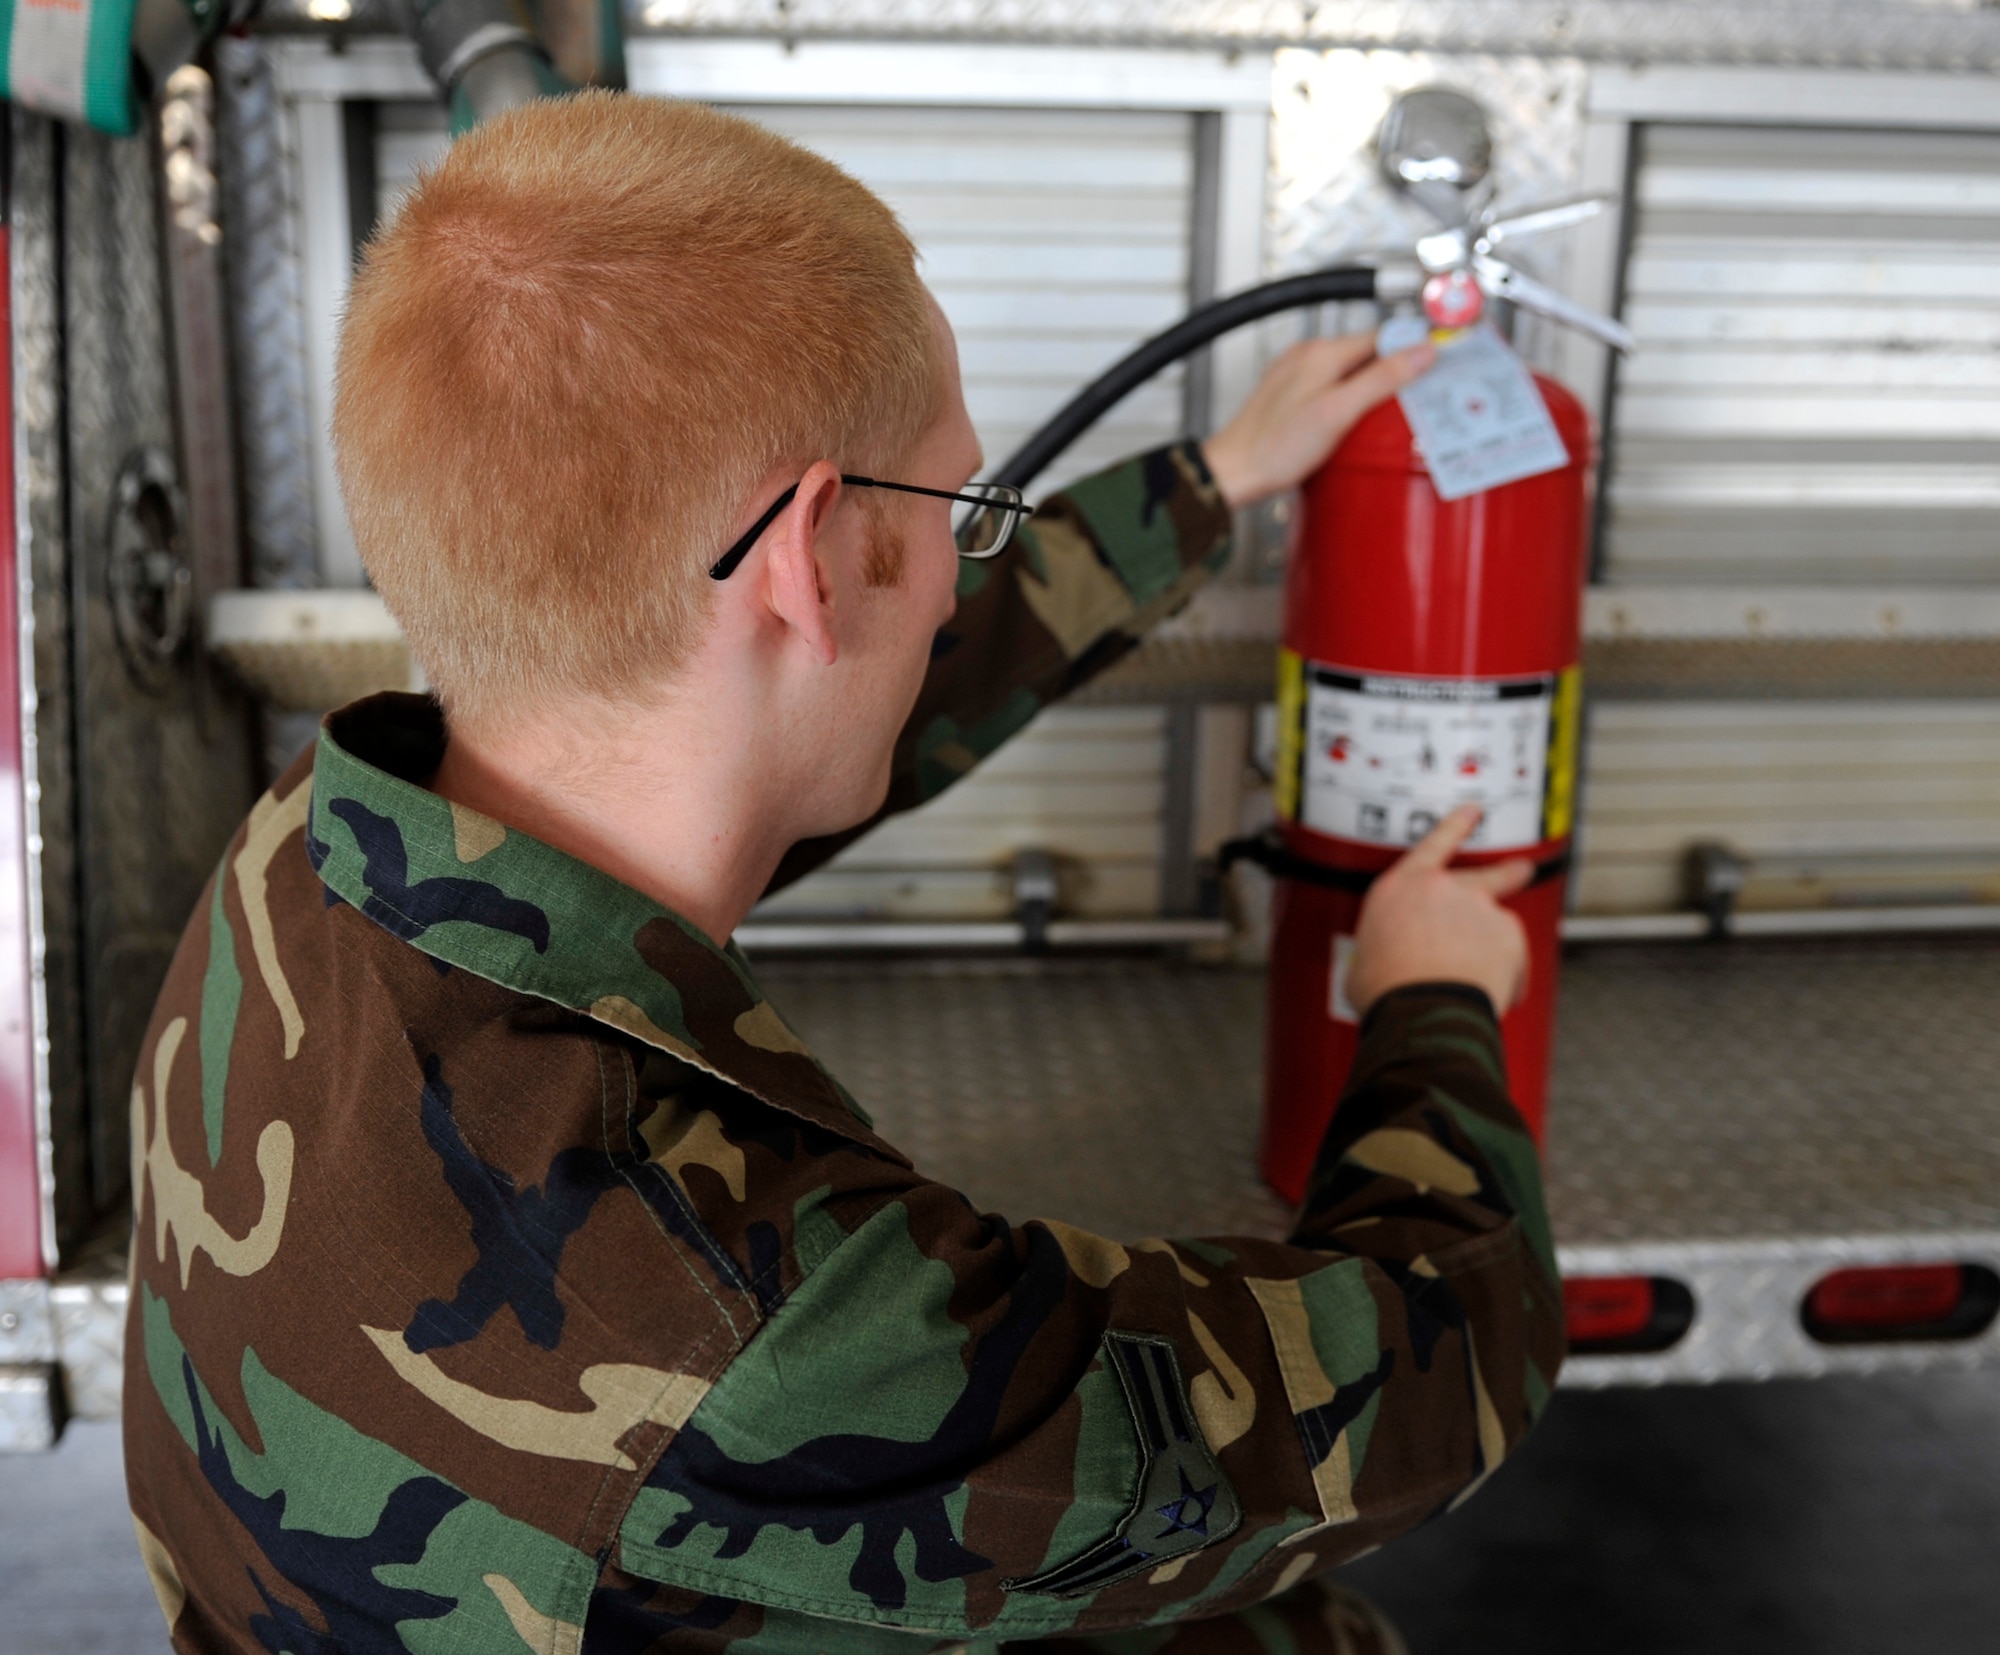 Airman 1st Class Andrew Sloan, 19th Civil Engineering Squadron fire fighter, demonstrates Sept. 21 the proper procedures for using a fire extinguisher on base. Fire extinguishers can put out class A, B, and C fires to include wood and paper, liquid fires and charged electrical fires. (U.S. Air Force photo by Airman 1st Class Lausanne Pacheco)